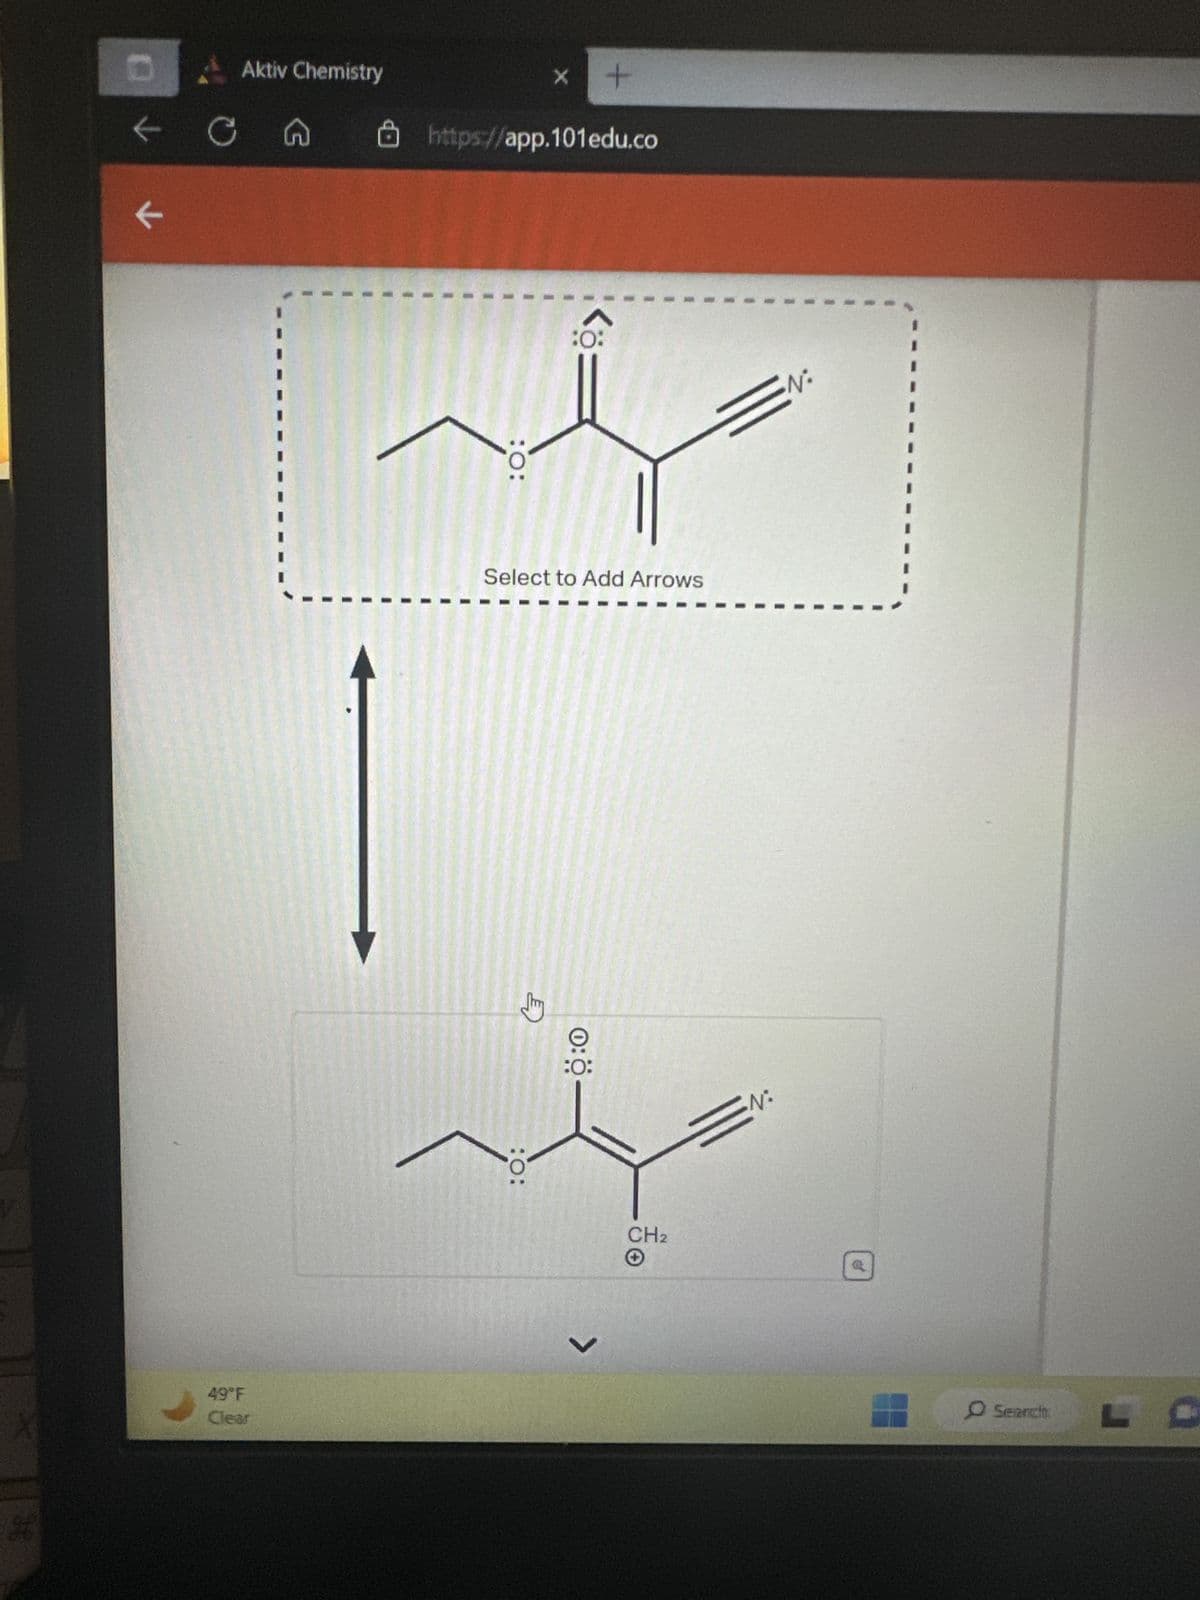 ✓
K
C
G
https://app.101edu.co
Ethyl cyanoacrylate rapidly polymerizes in the presence of
water. Cyanoacrylates are the basis of superglues.
49°F
Clear
Curved arrows are used to illustrate the flow of electrons. Using
the provided resonance structures, draw the curved electron-
pushing arrows to show the interconversion between
resonance hybrid contributors. Be sure to account for all bond-
breaking and bond-making steps.
چلہ
: 0:
:0:
CH₂
Select to Add Arrows
<
0::
O Search